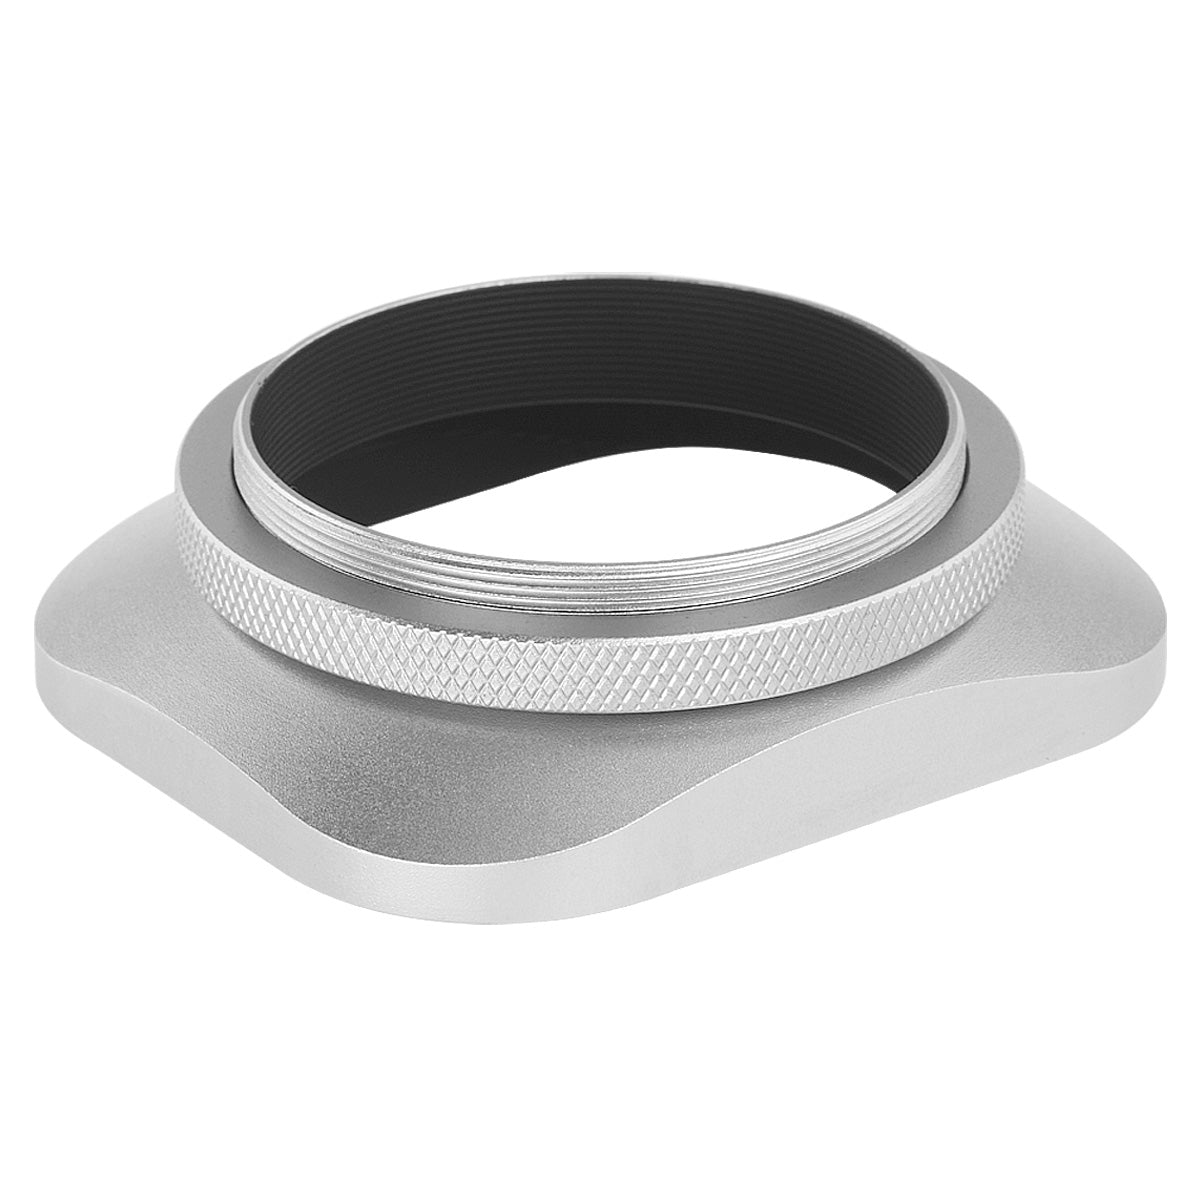 Haoge LH-EW2 49mm Square Metal Screw-in Lens Hood with Cap for 49mm Canon Nikon Sony Leica Voigtlander Nikkor Panasonic Pentax Contax Olympus Lens and Other Lens with 49mm Filter Thread Silver